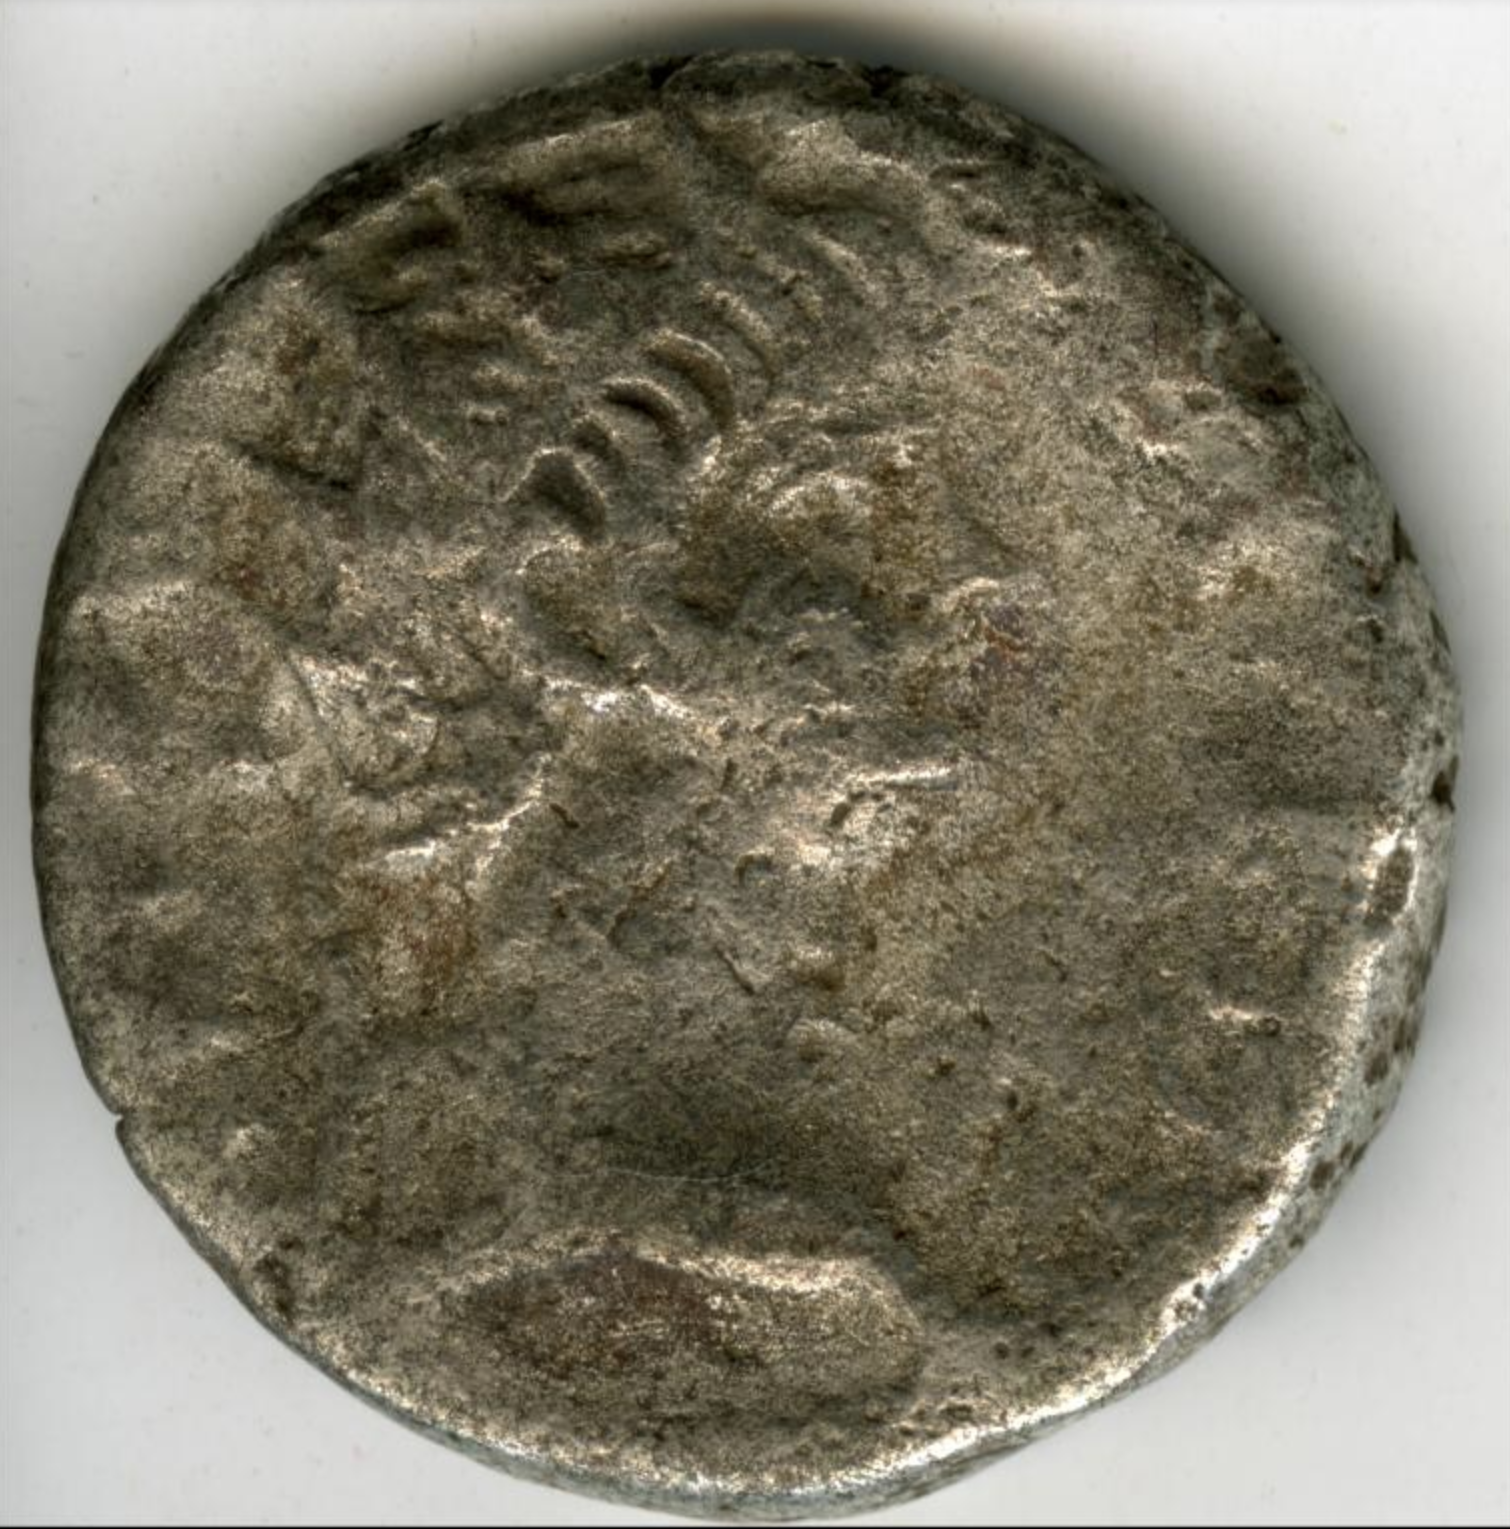 Coin showing Nero